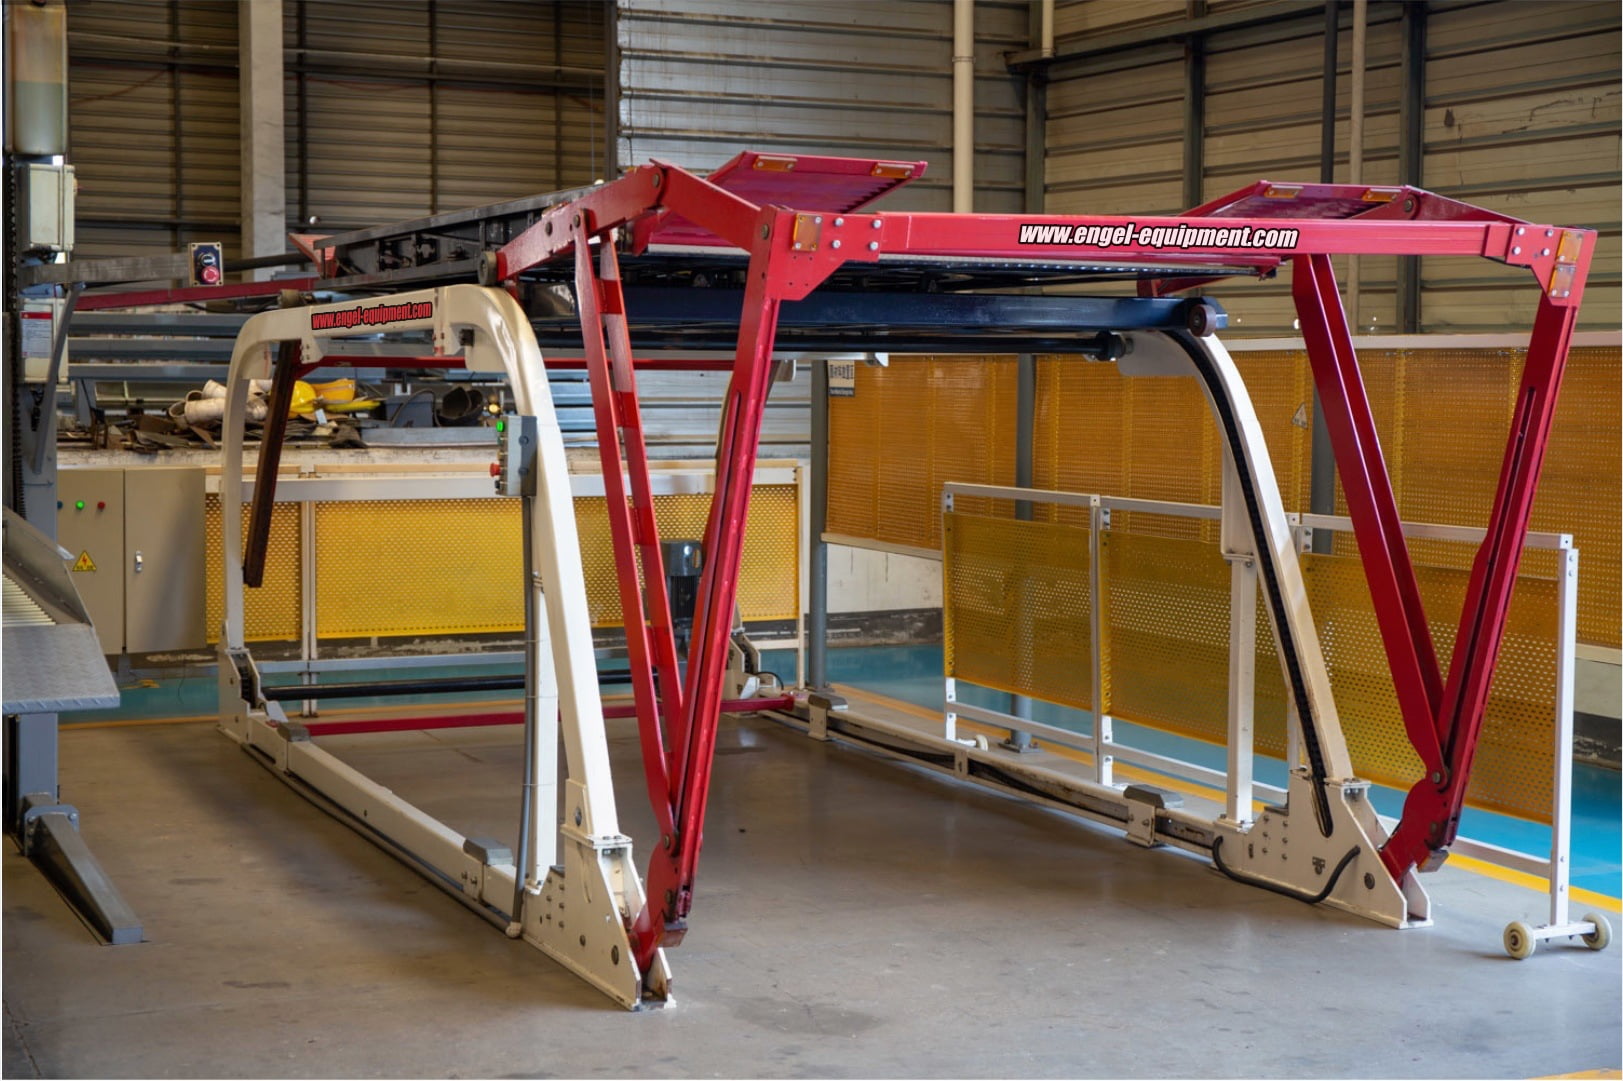 Red white and black car lift in a warehouse.